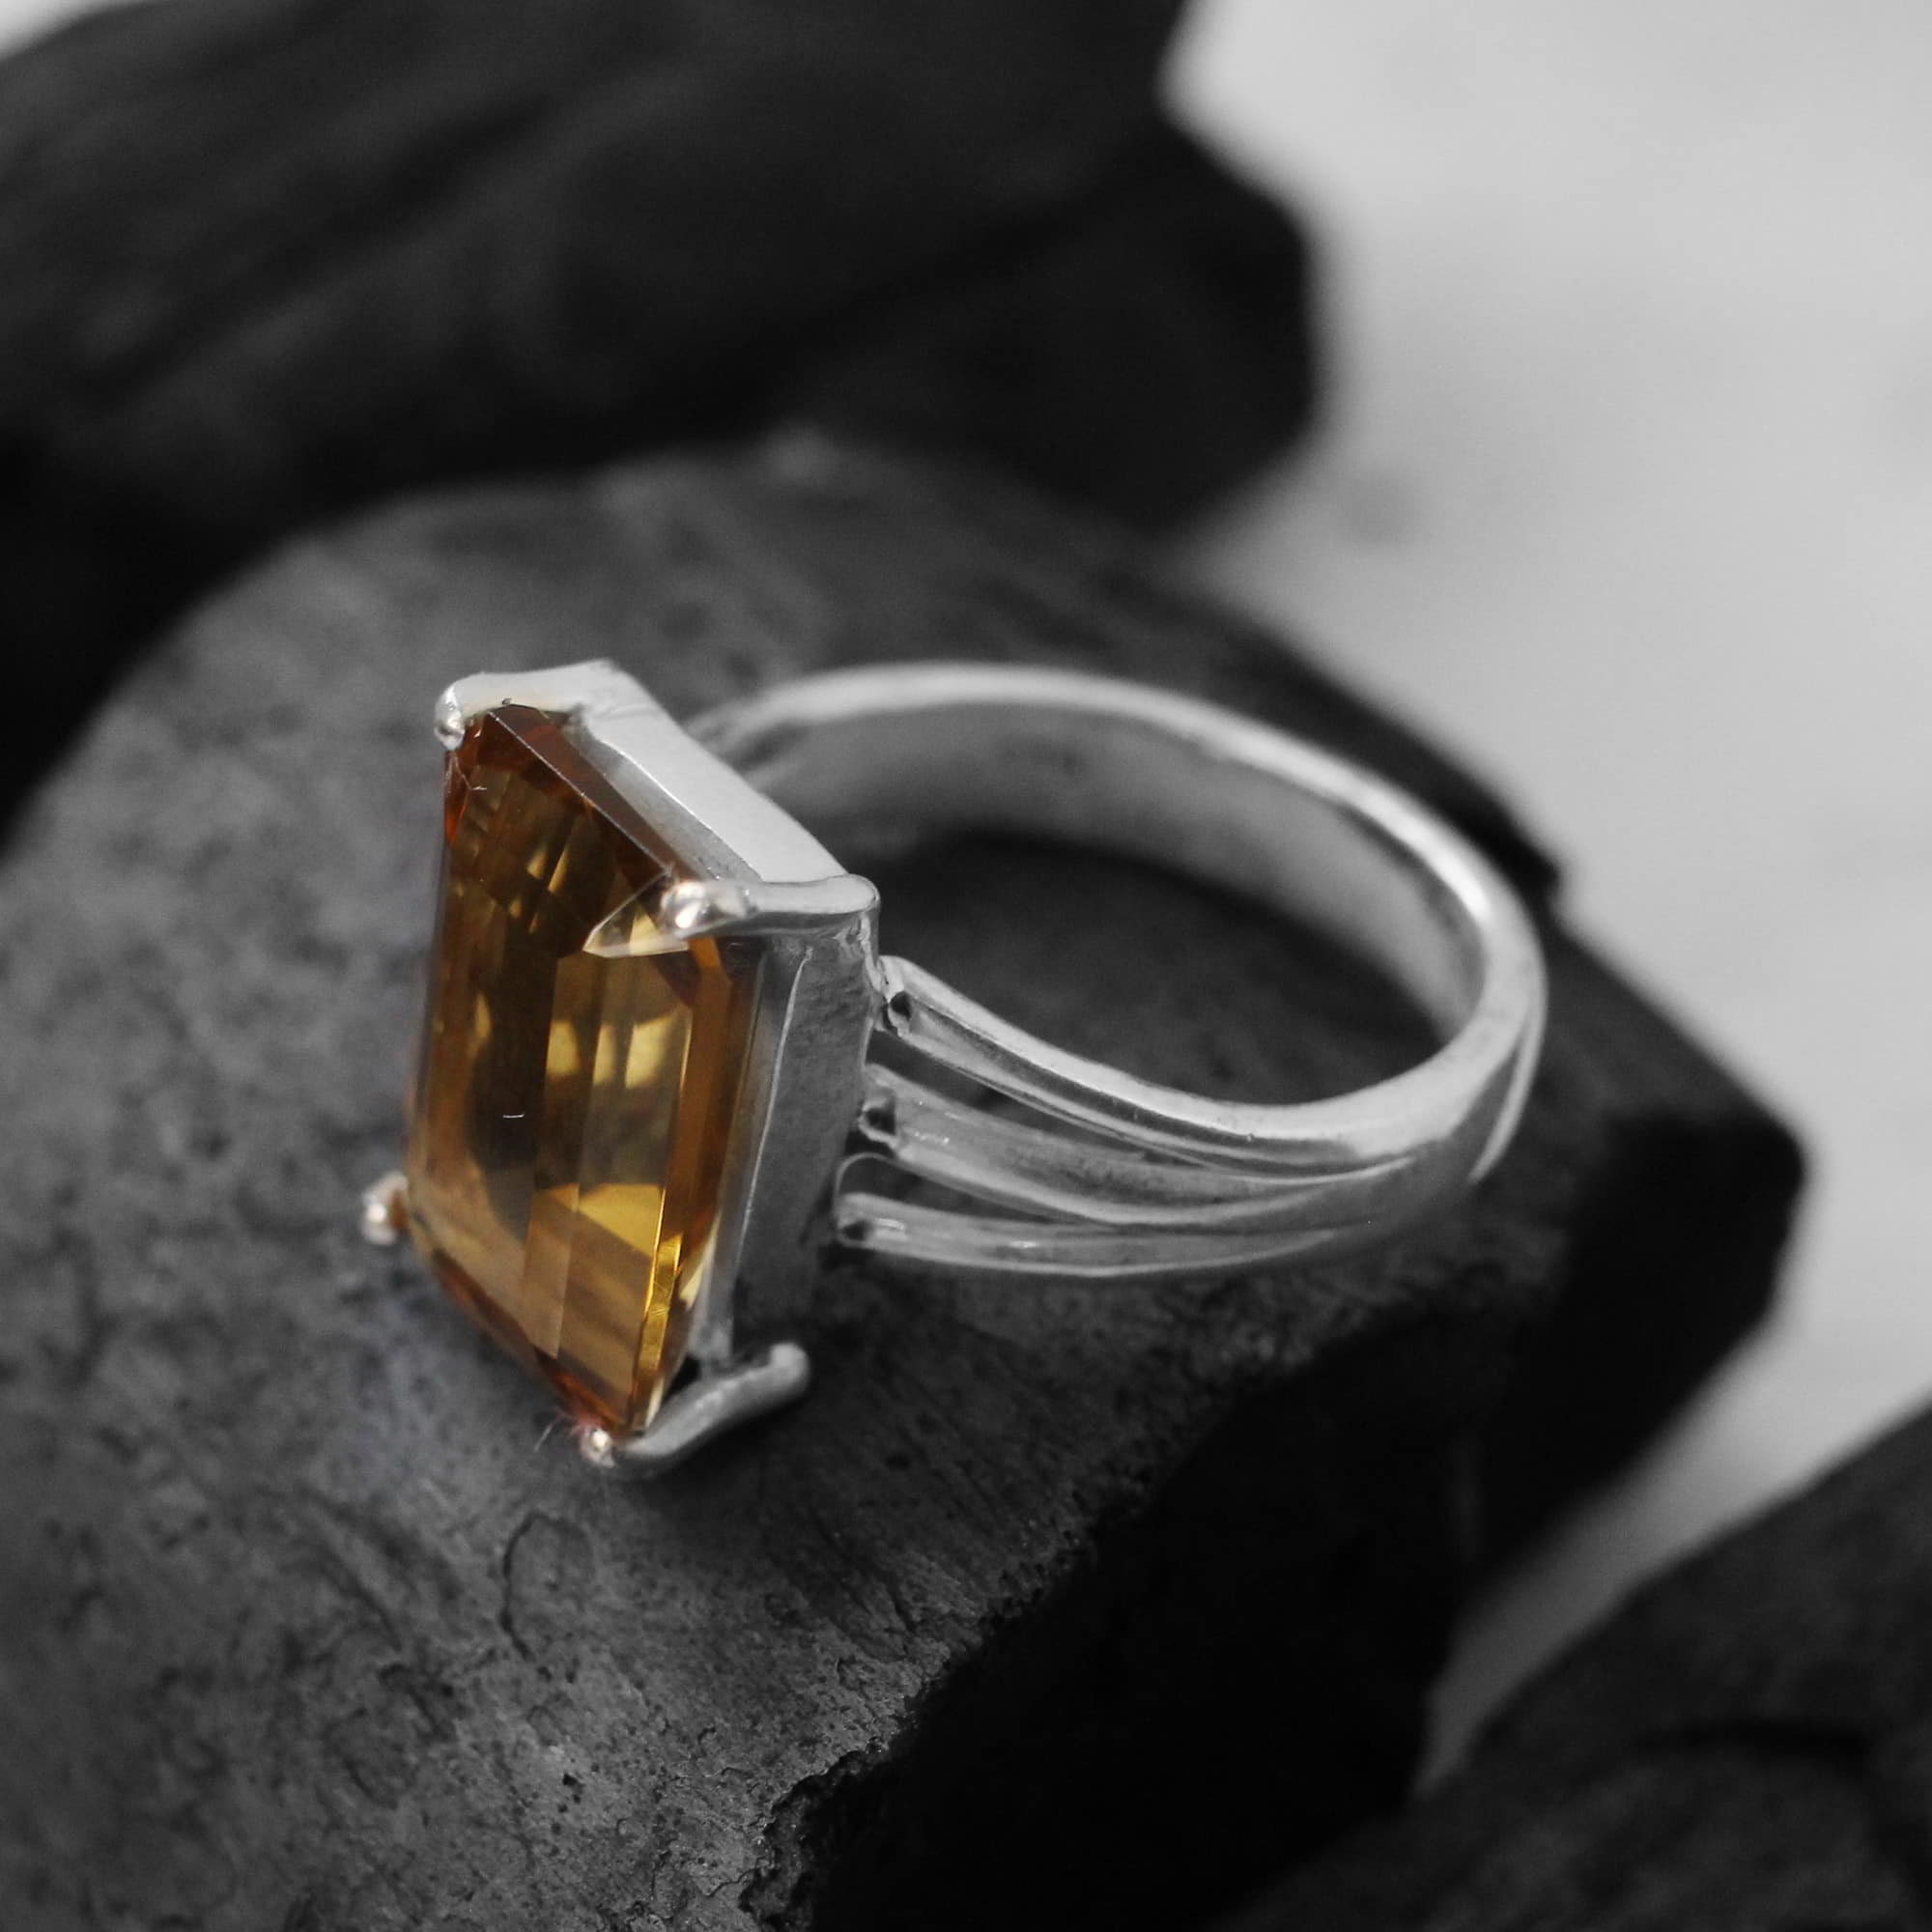 Jewelryonclick Real Citrine Silver Mark Rings for Men's 4 Carat November  Birthstone Jewelry in Size 4-13